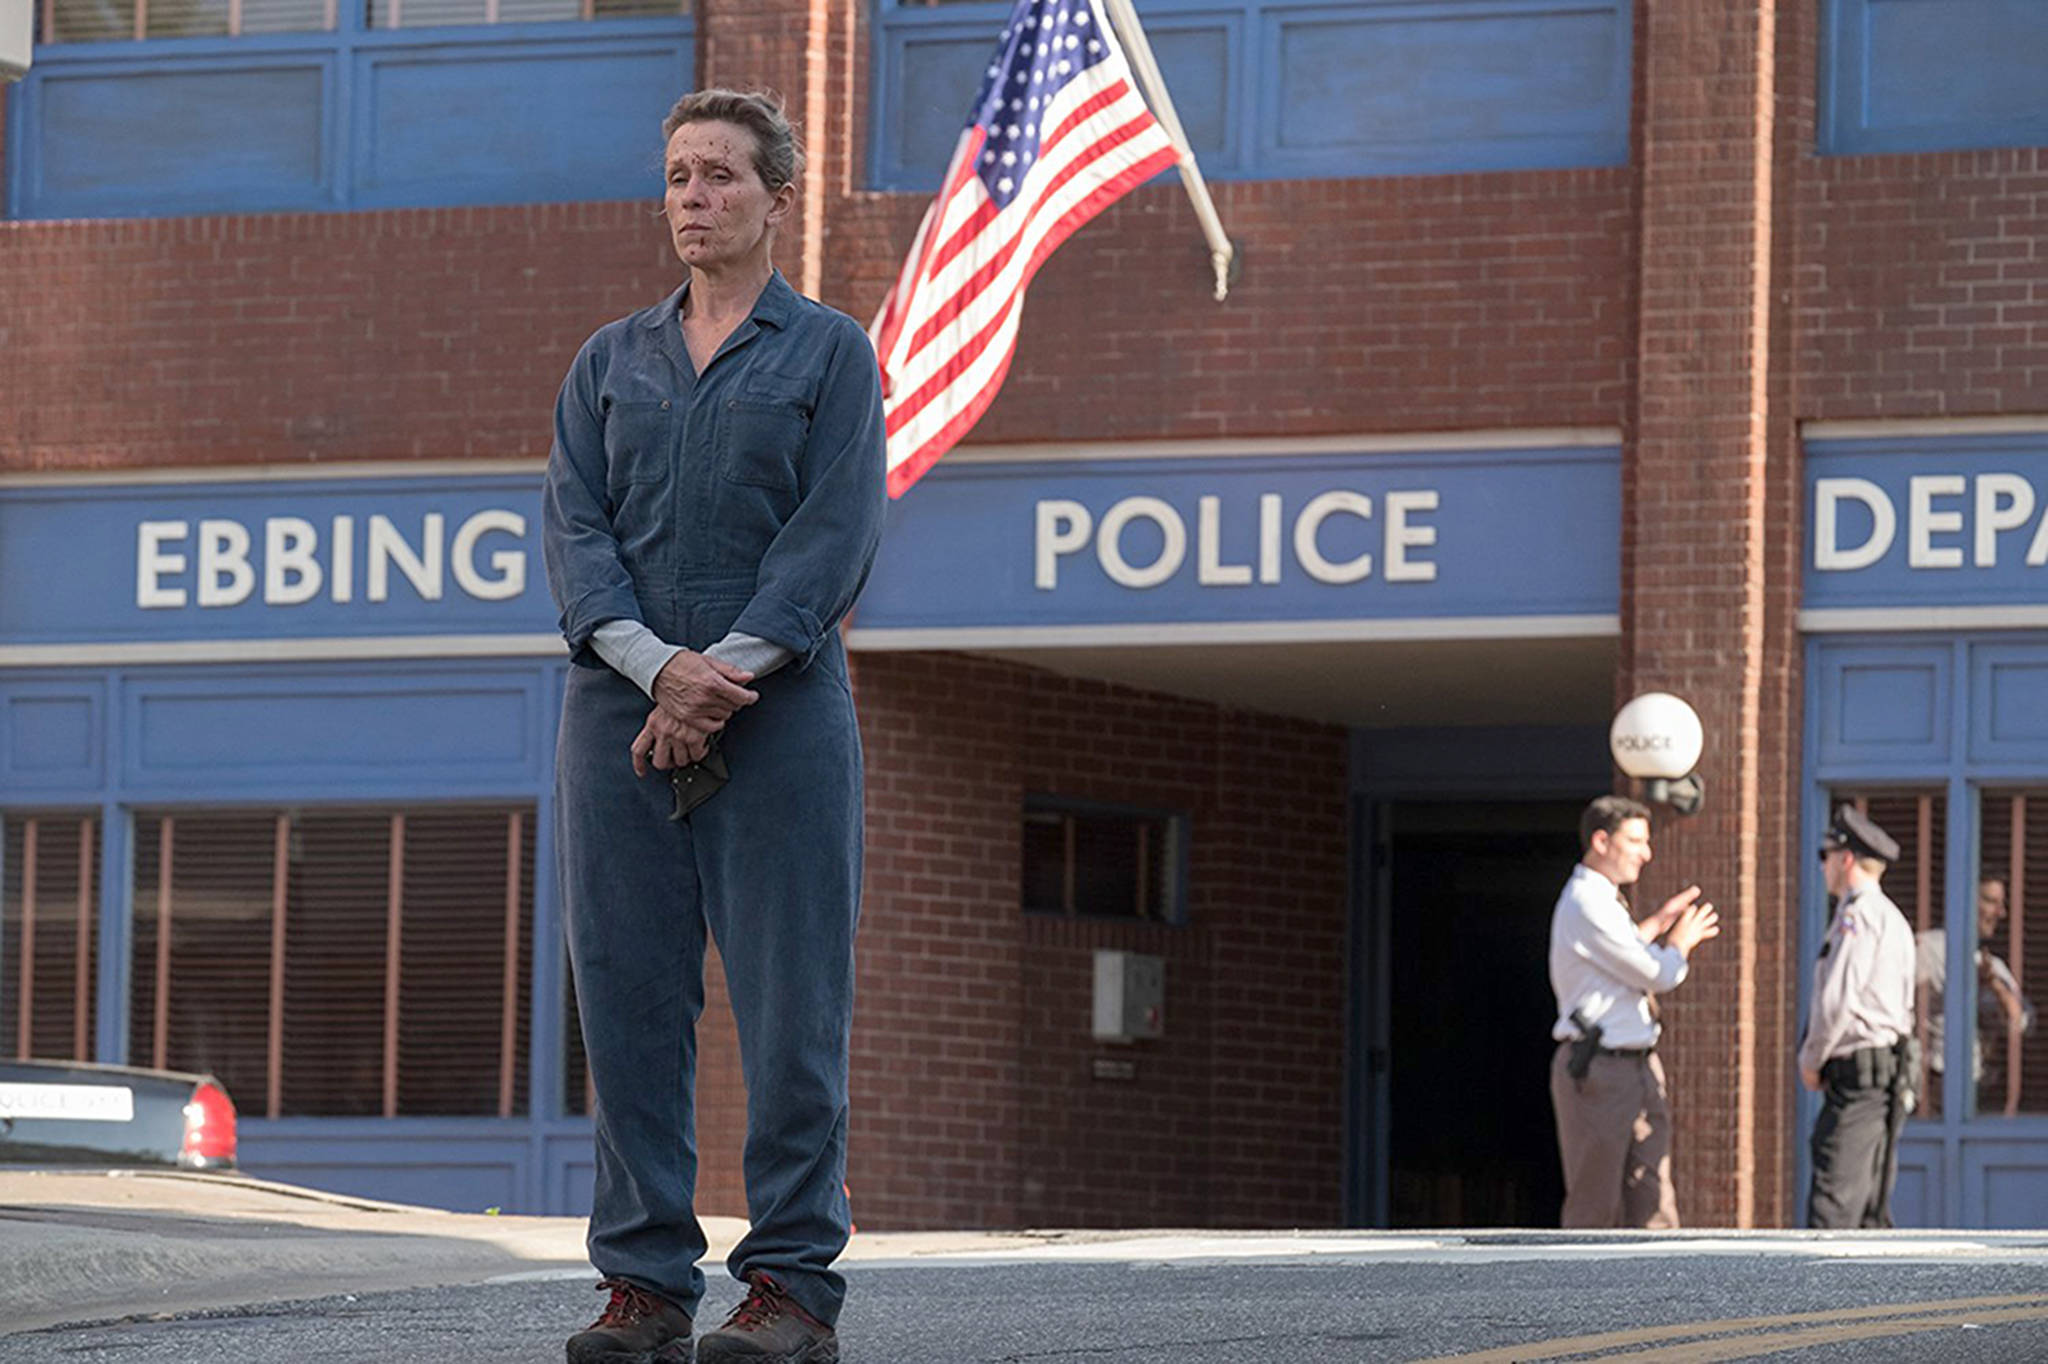 Frances McDormand plays Mildred Hayes in one of the year’s best, ‘Three Billboards Outside Ebbing, Missouri.’ Courtesy of Twentieth Century Fox